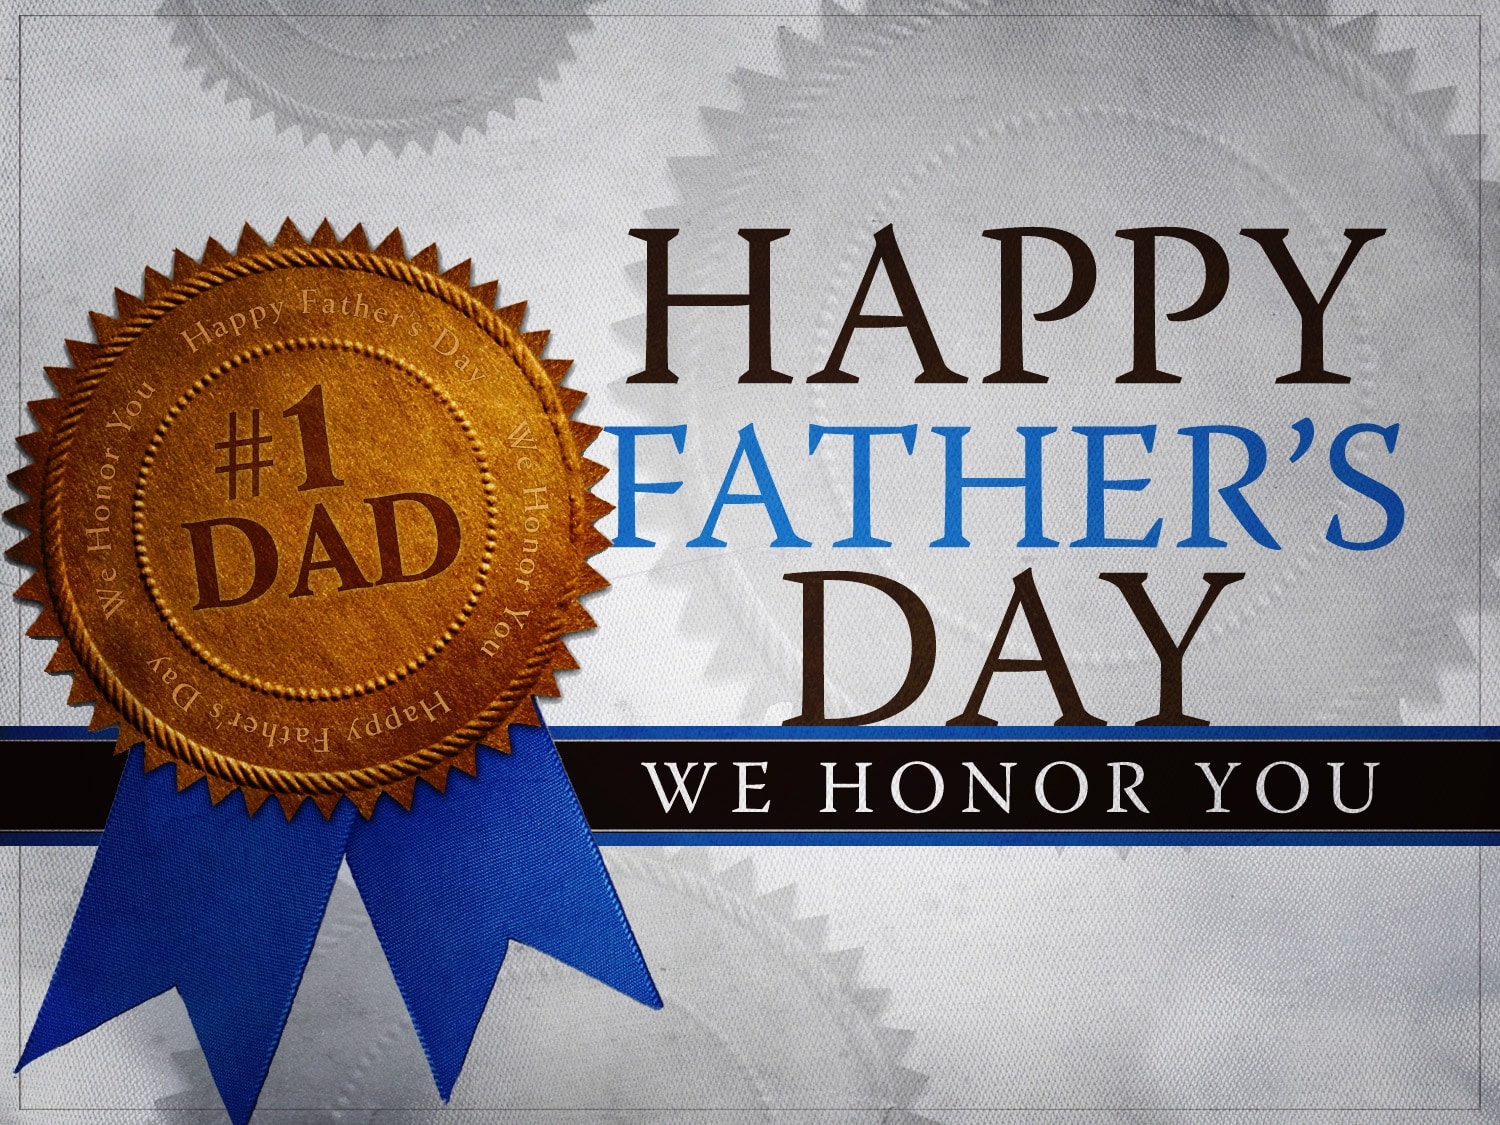 Download Fathers Day Image